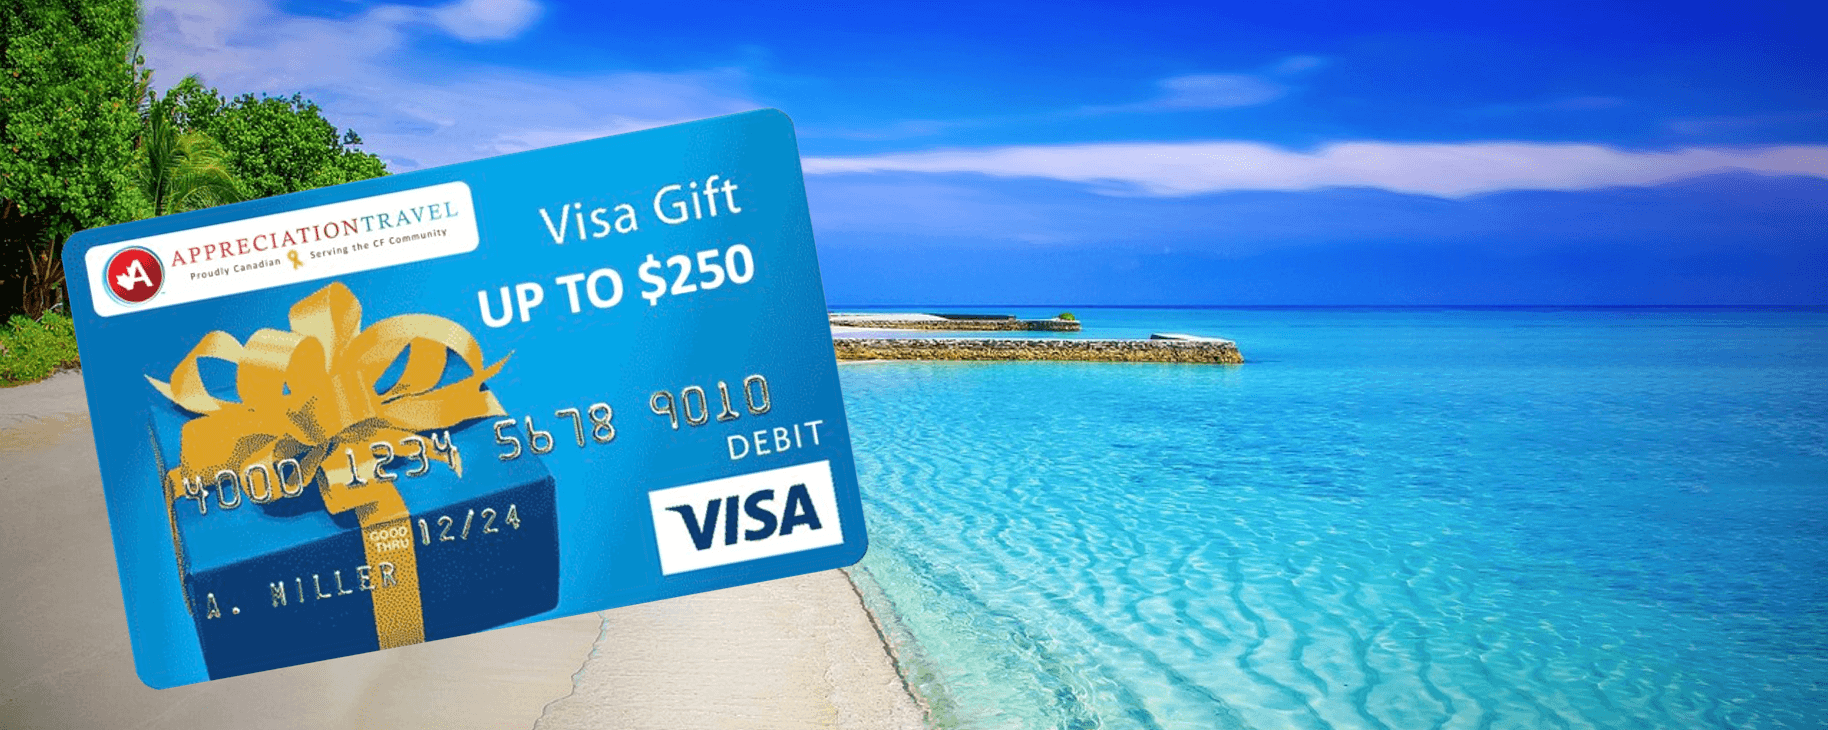 RECEIVE UP TO $250 IN VISA GIFT CARDS WHEN YOU BOOK background